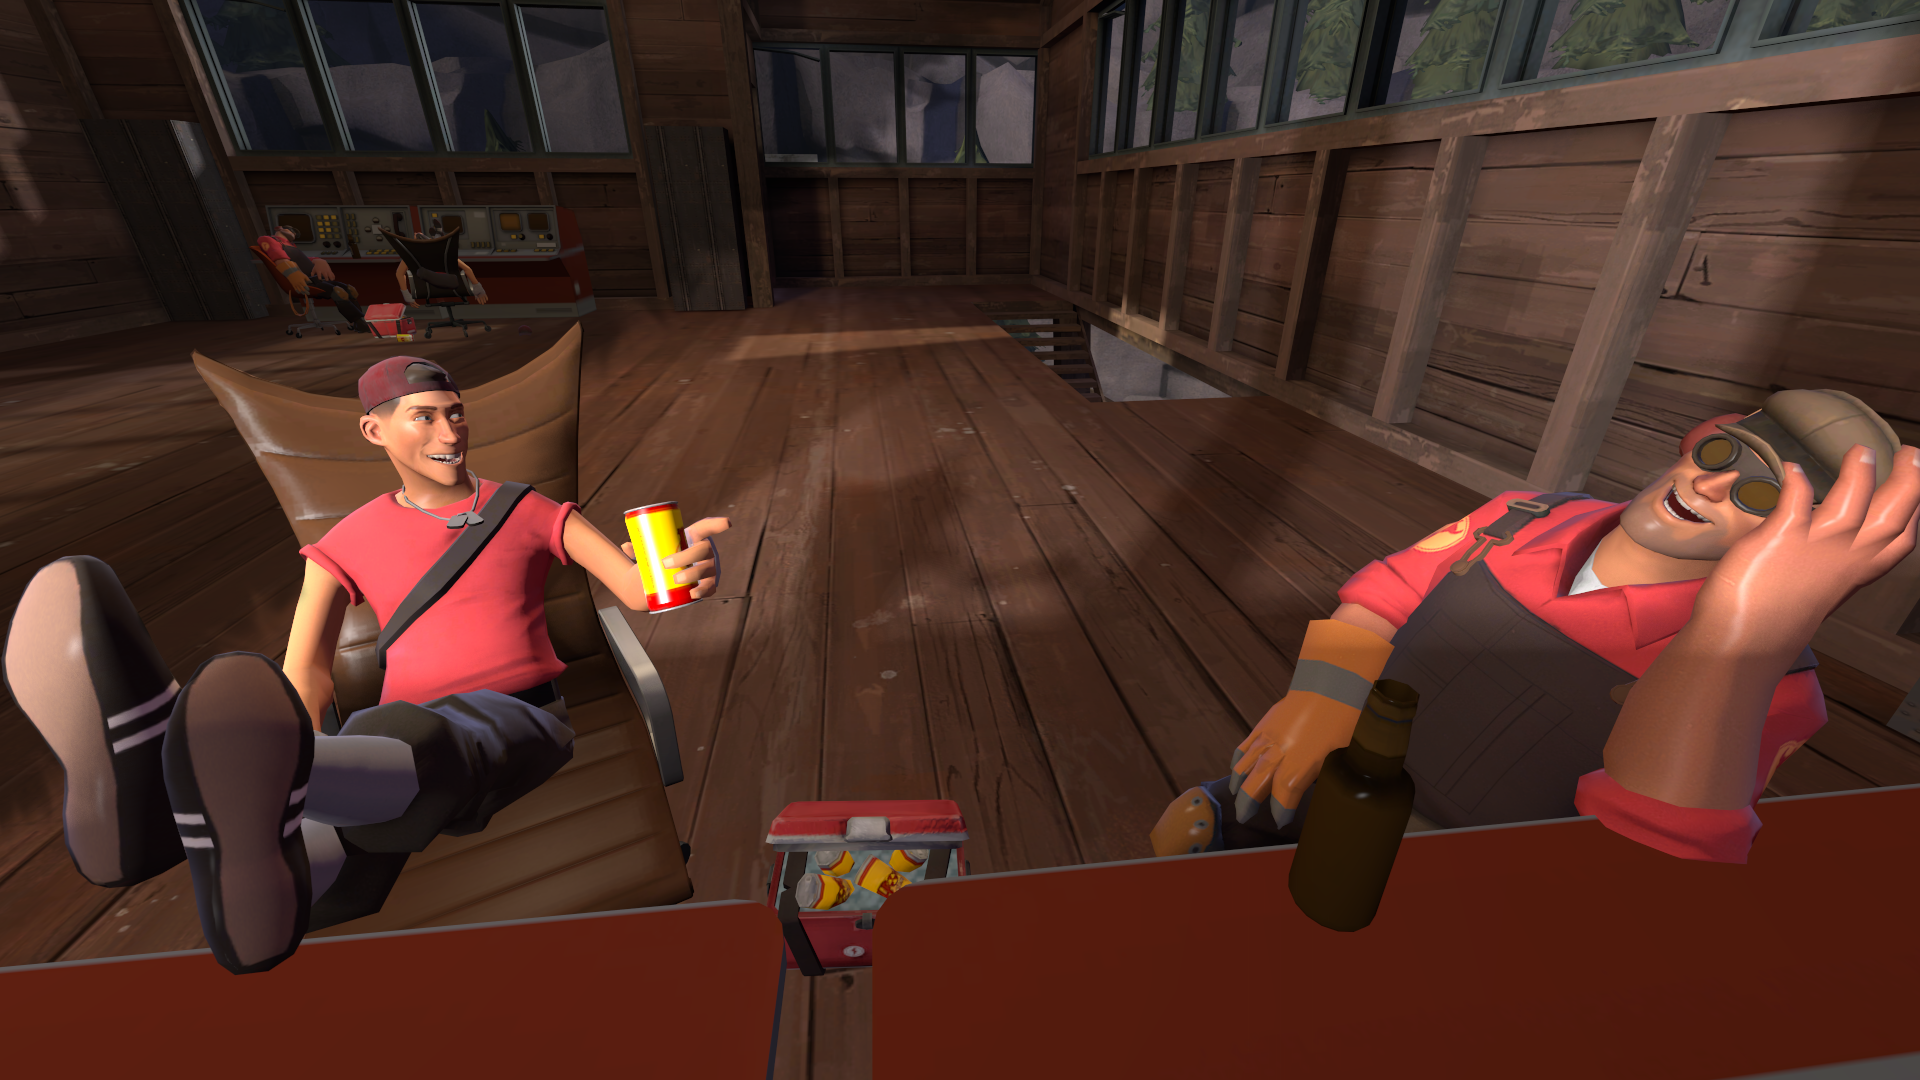 Tf2 Logic: Coming Soon: The Friendly’s, The Scammers, And The Memes. 